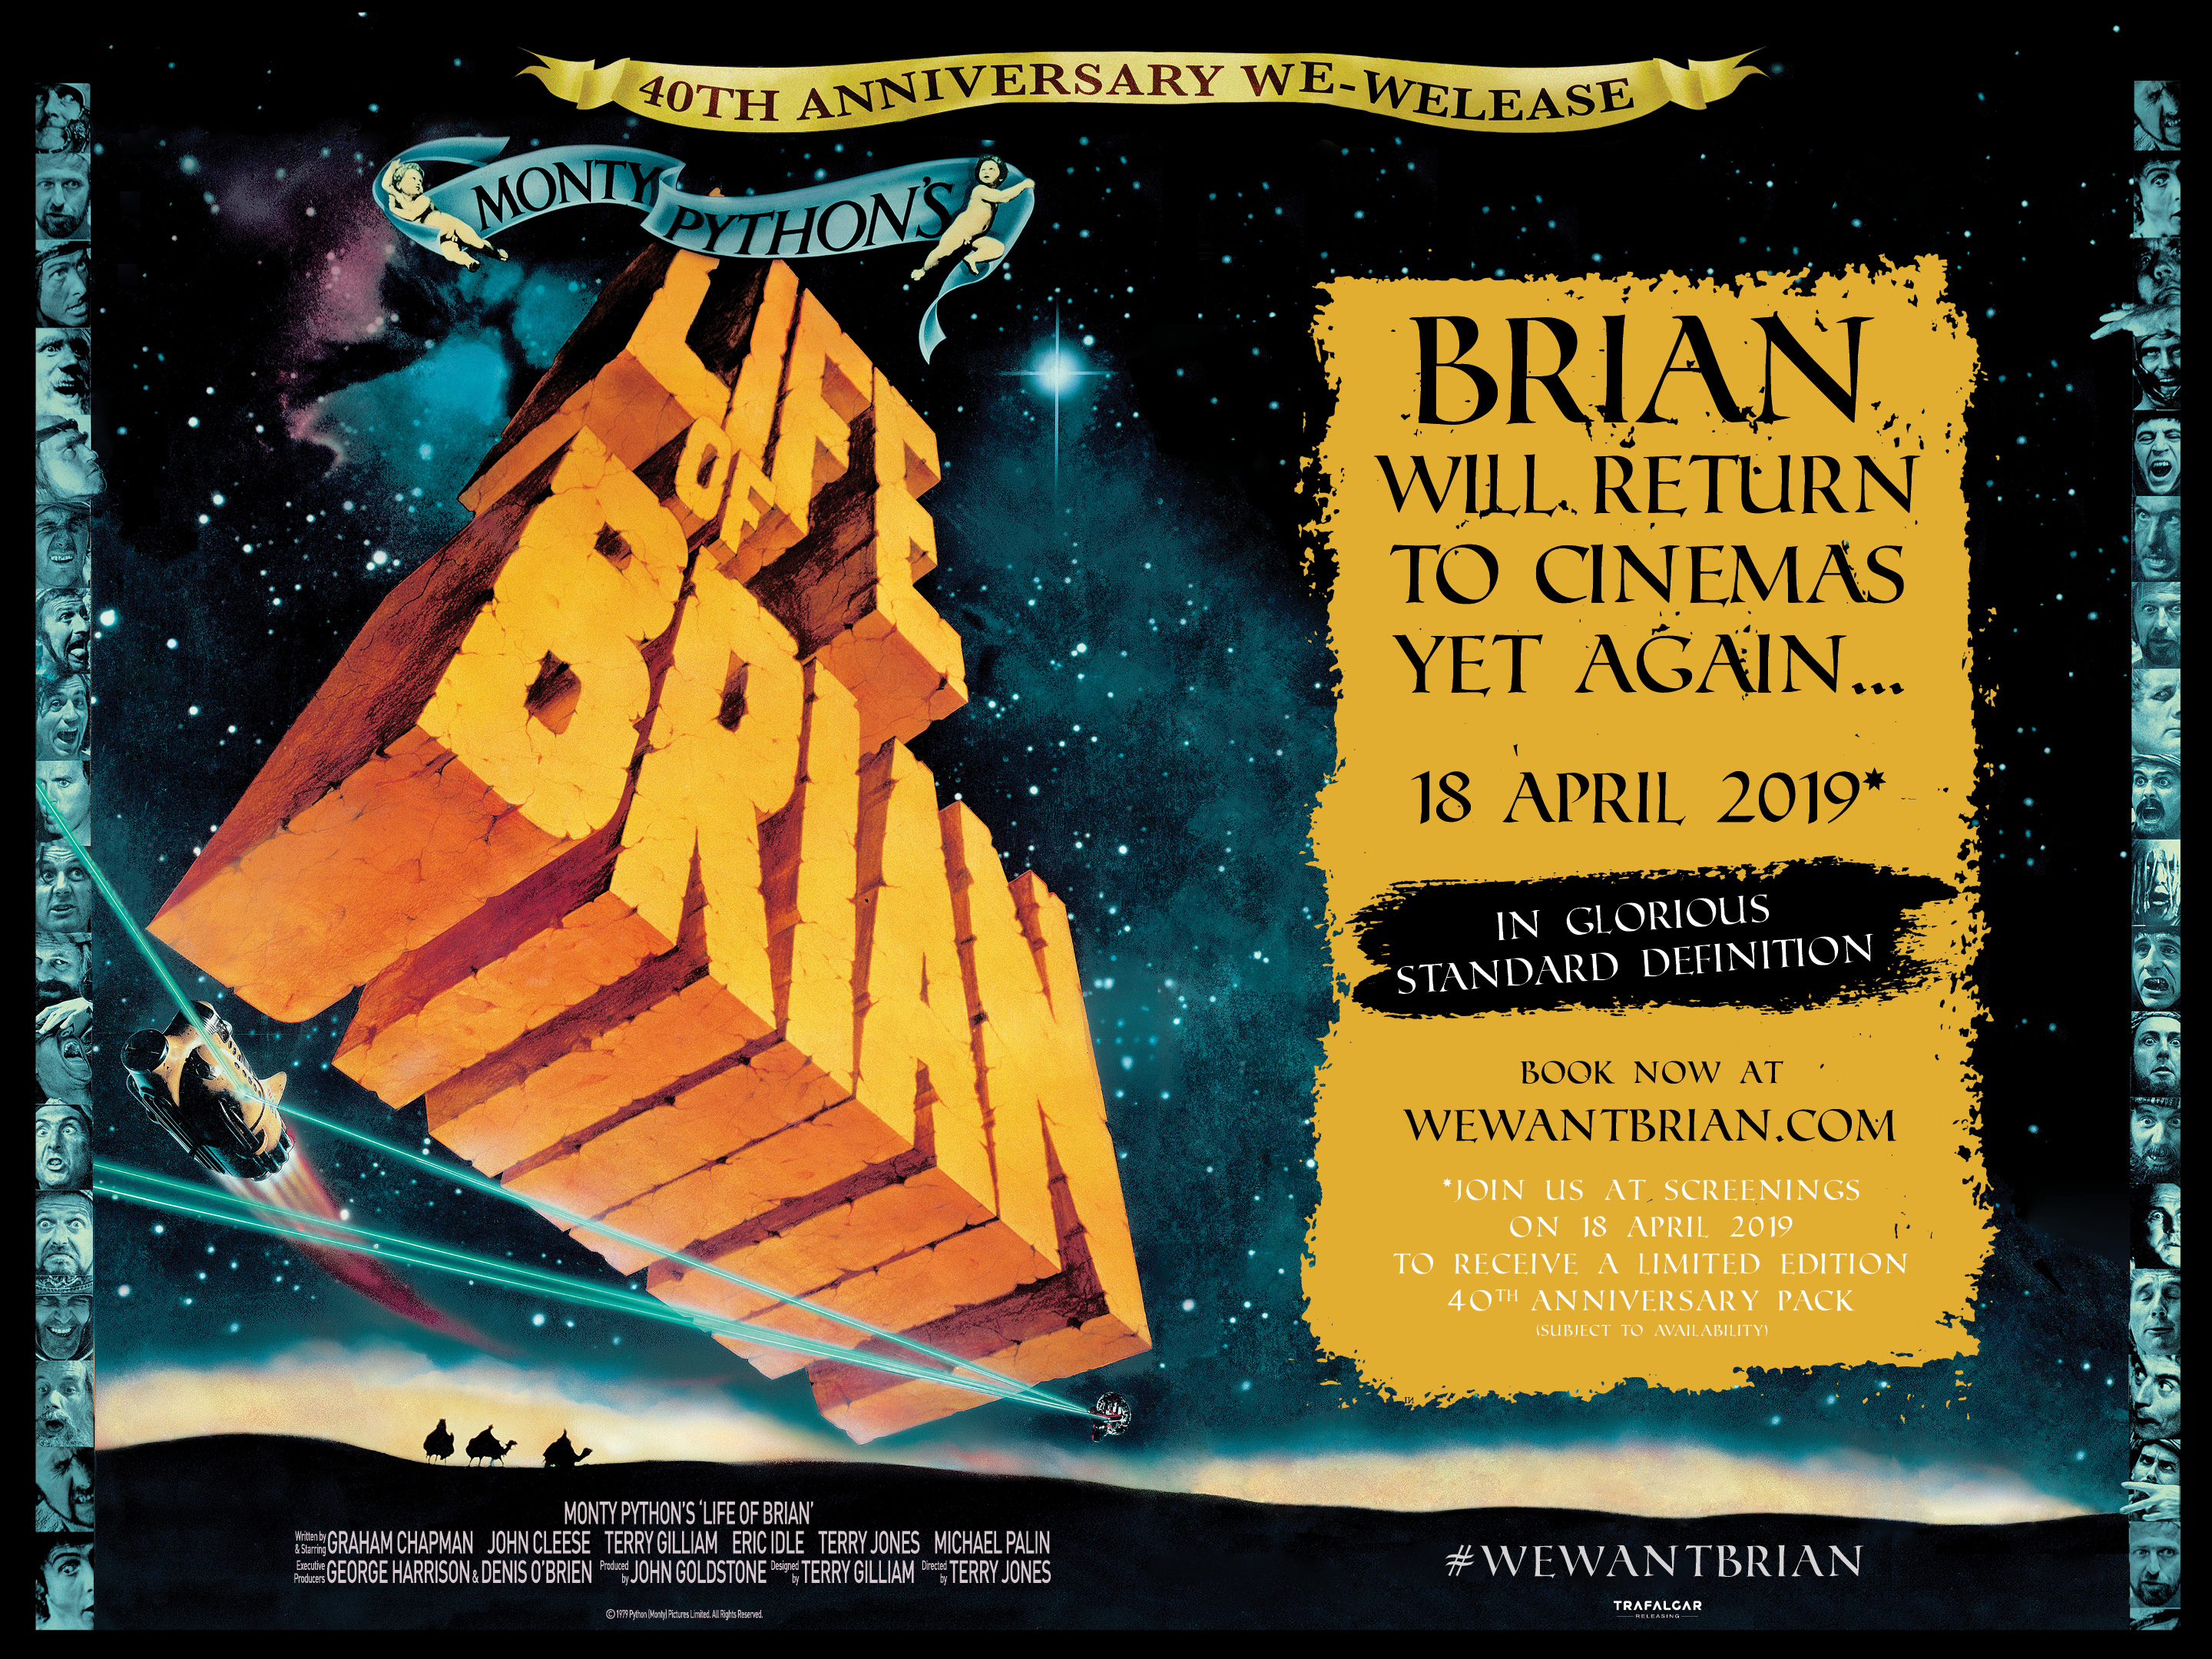 Life of Brian 4oth anniversary rerelease movie quad poster